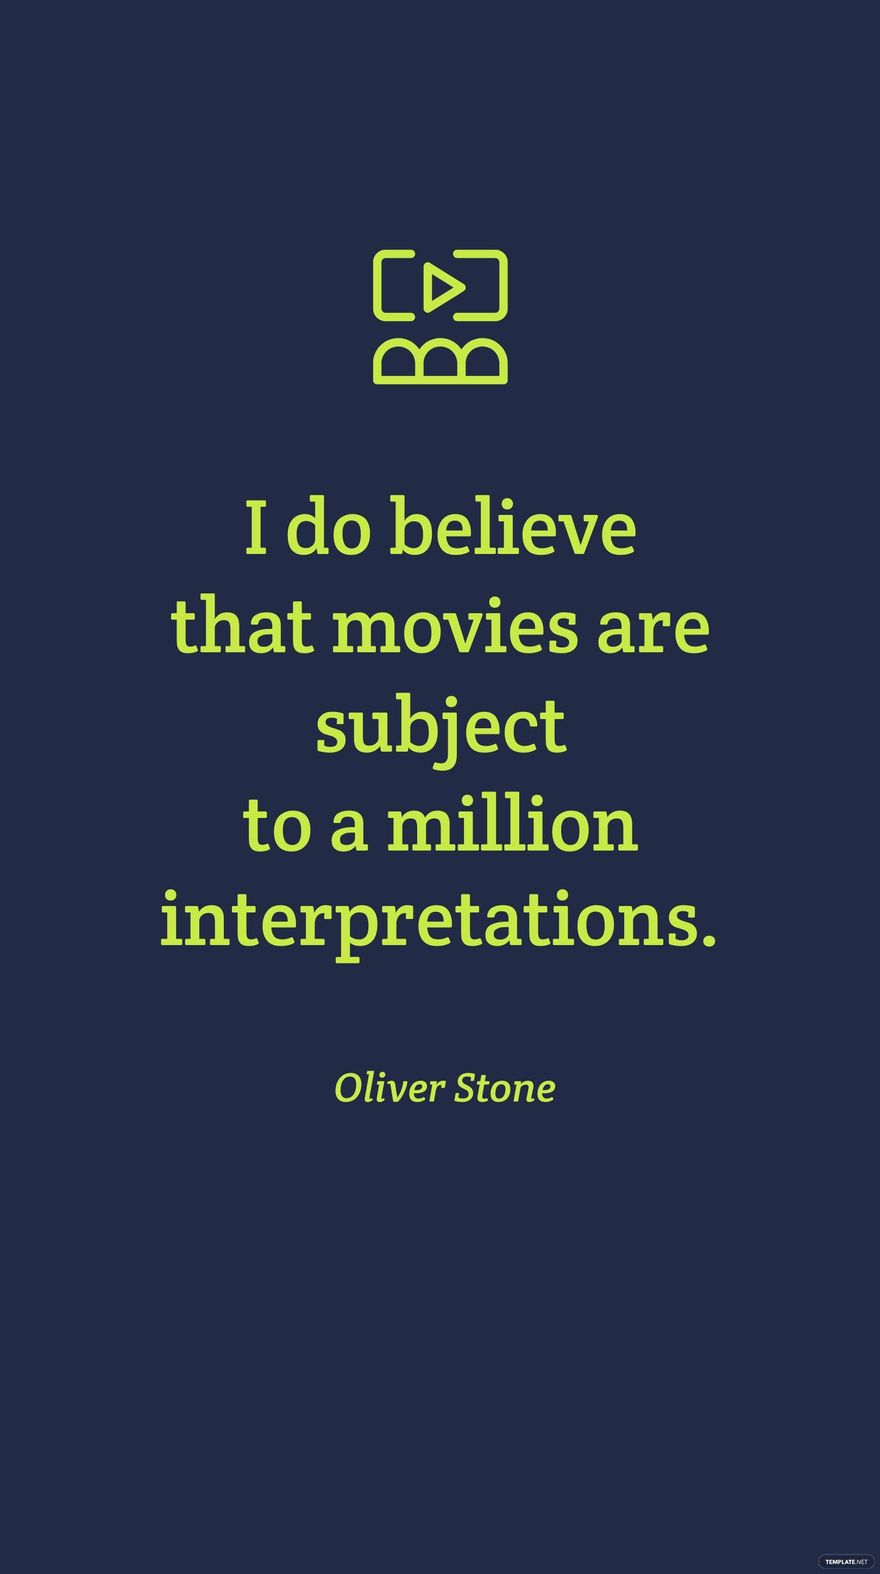 Free Oliver Stone - I do believe that movies are subject to a million interpretations. in JPG